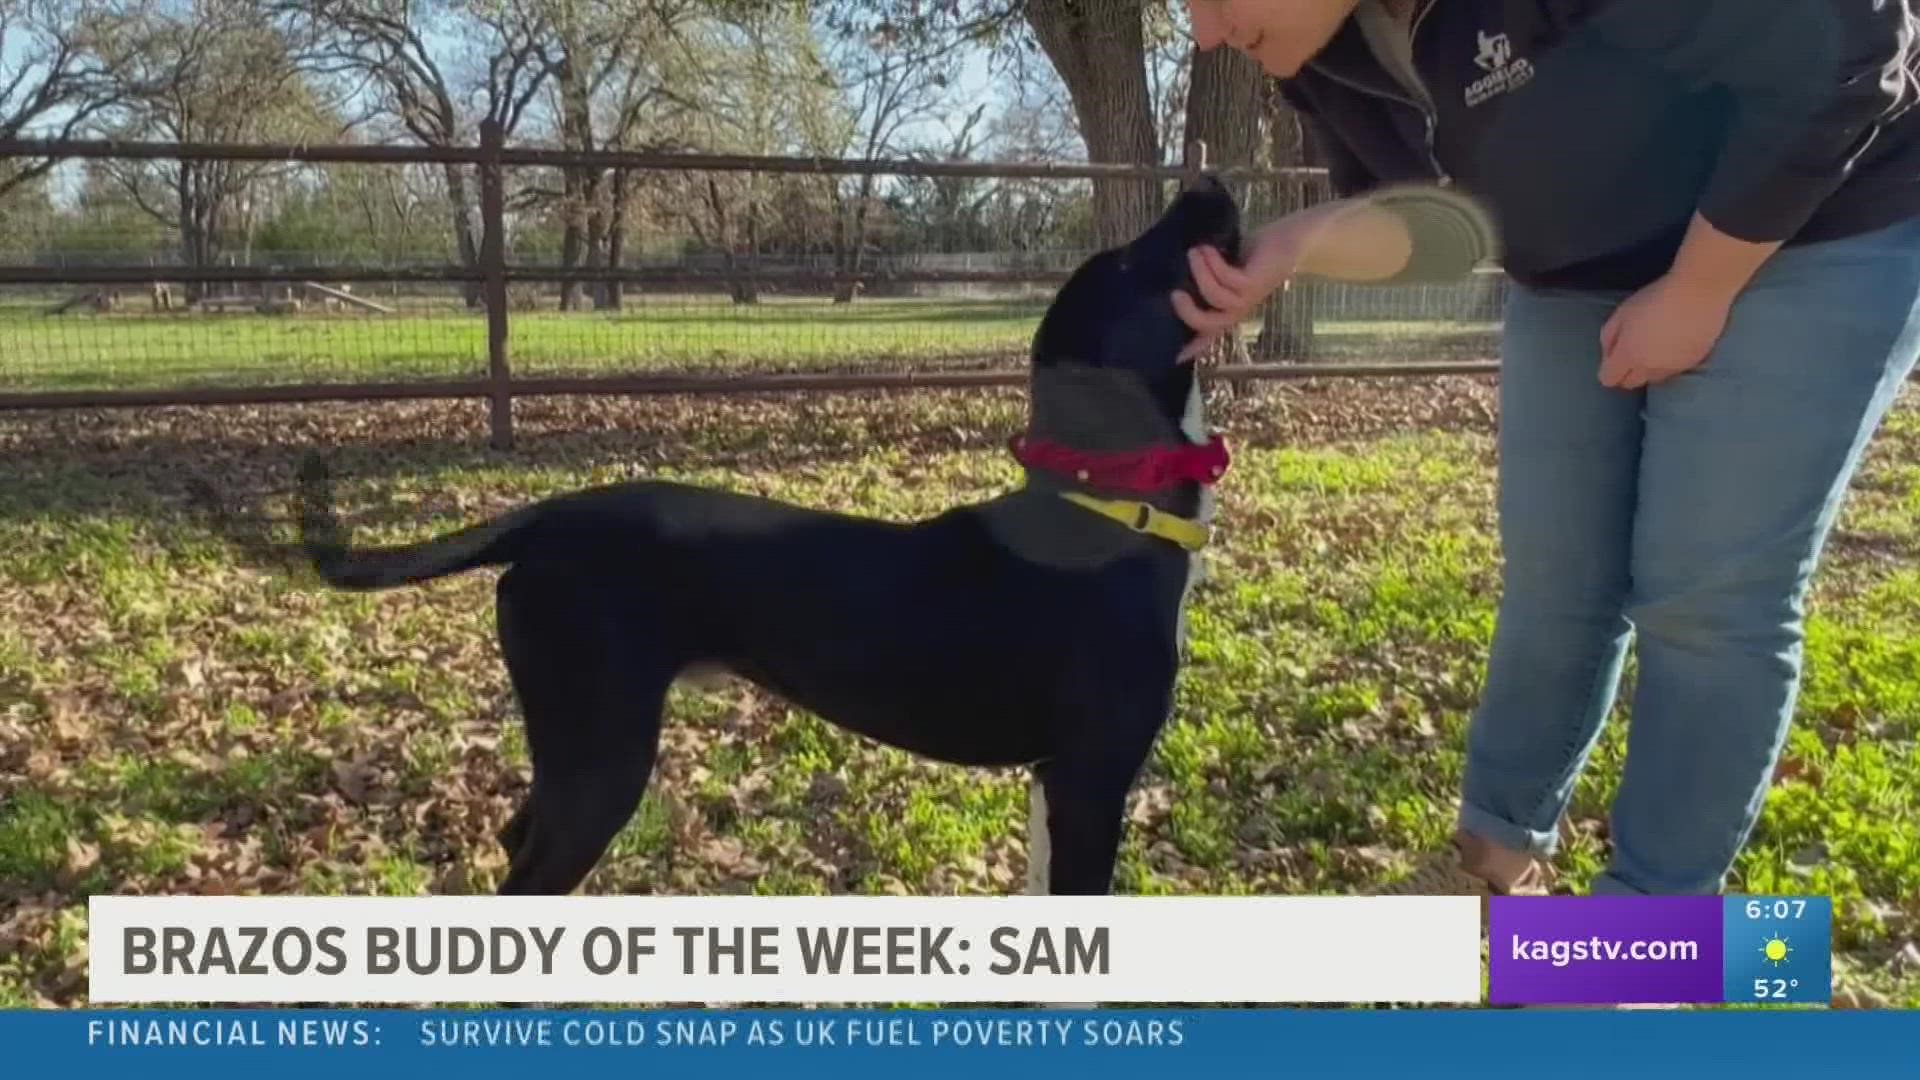 This week's featured Brazos Buddy is Sam, a young Lab mix that's looking to be adopted.